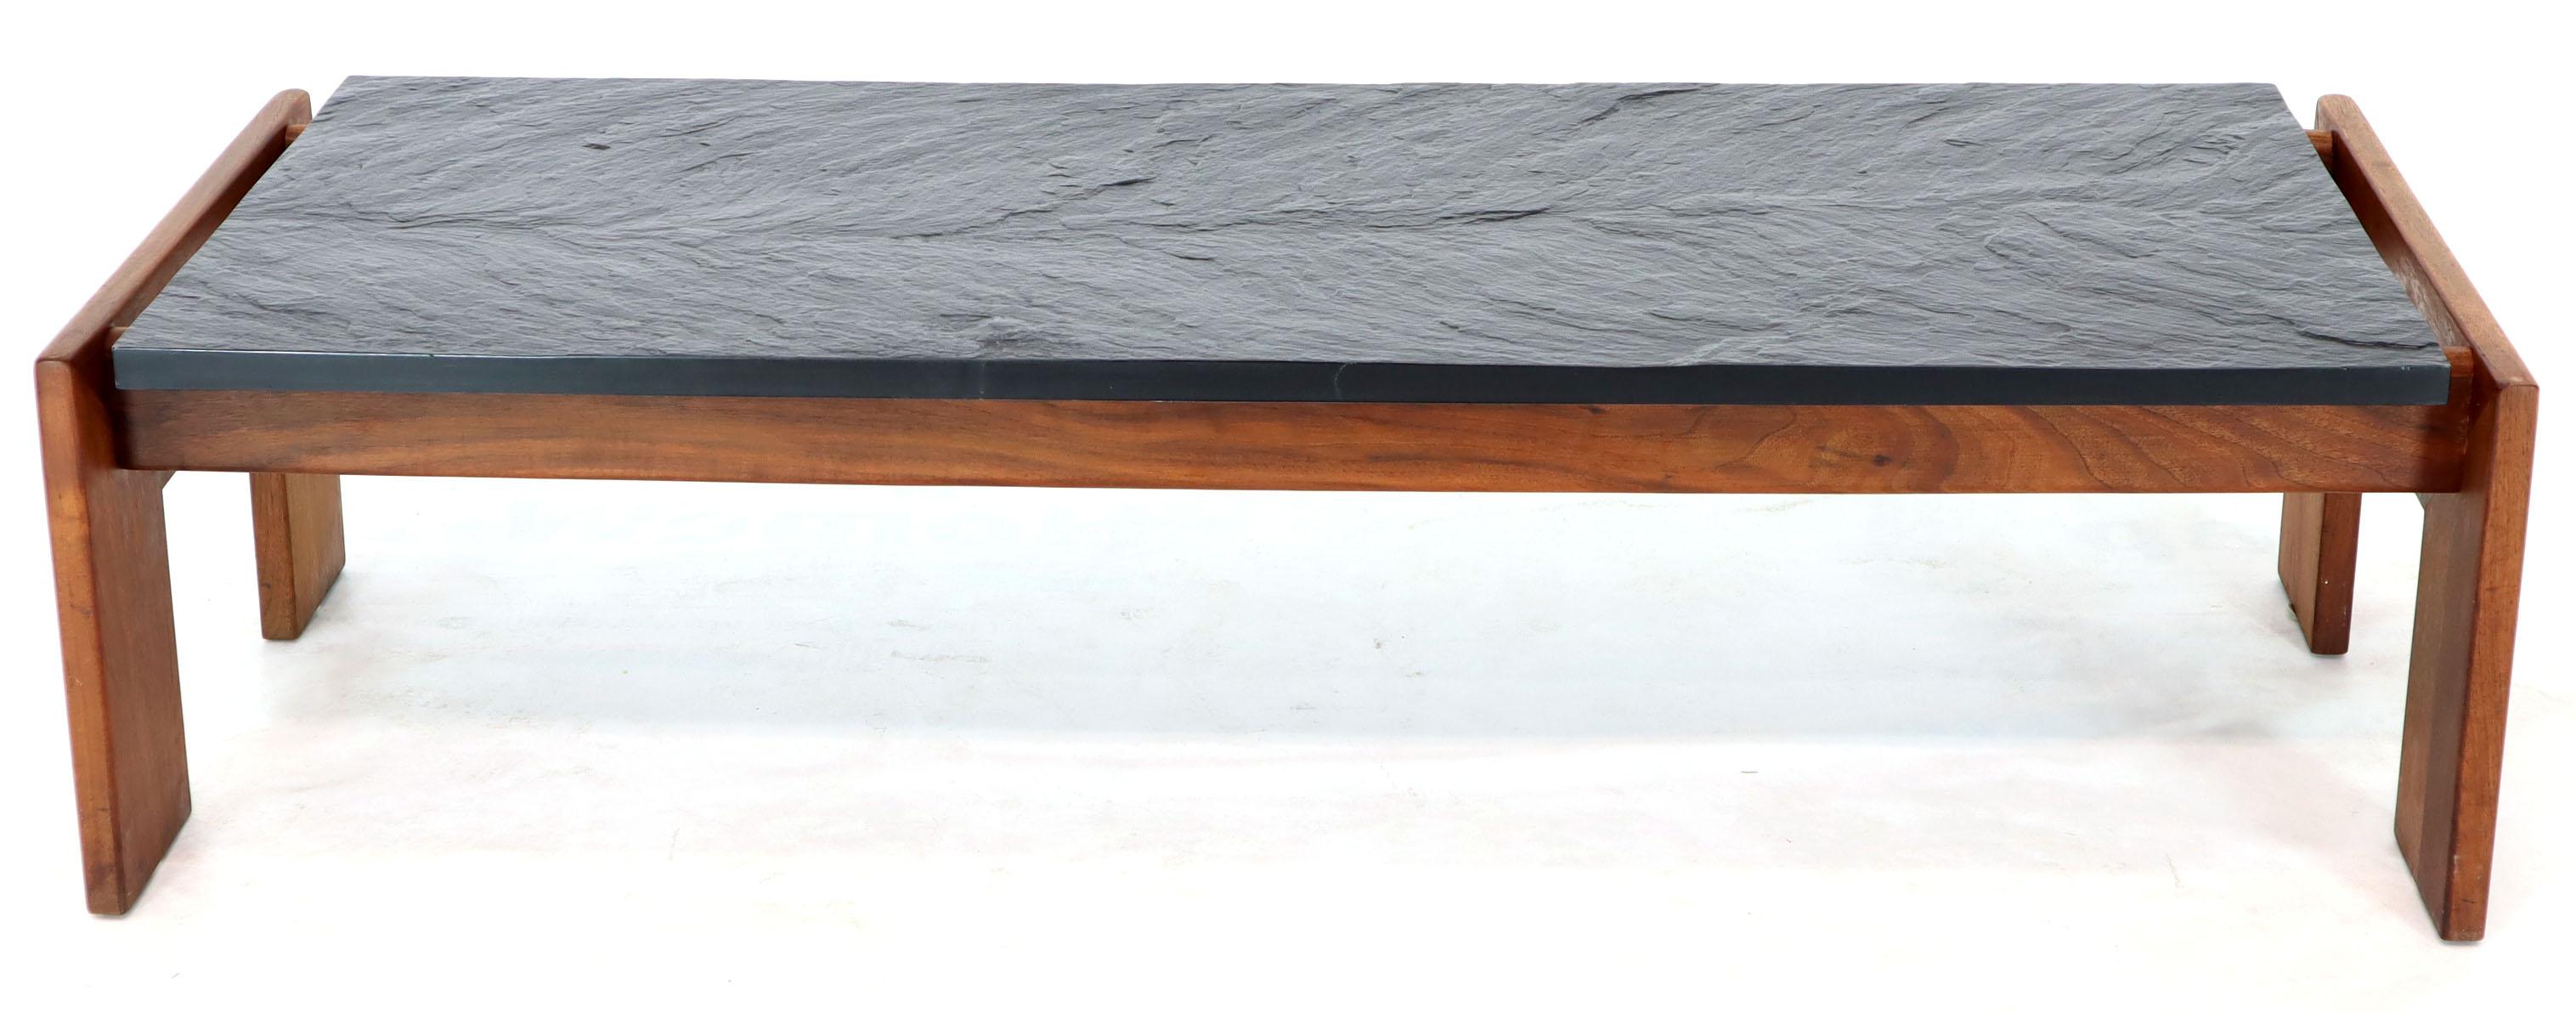 Mid-Century Modern oiled walnut base slate top long rectangel shape coffee table by Adrain Pearsall. The table is a good match to 